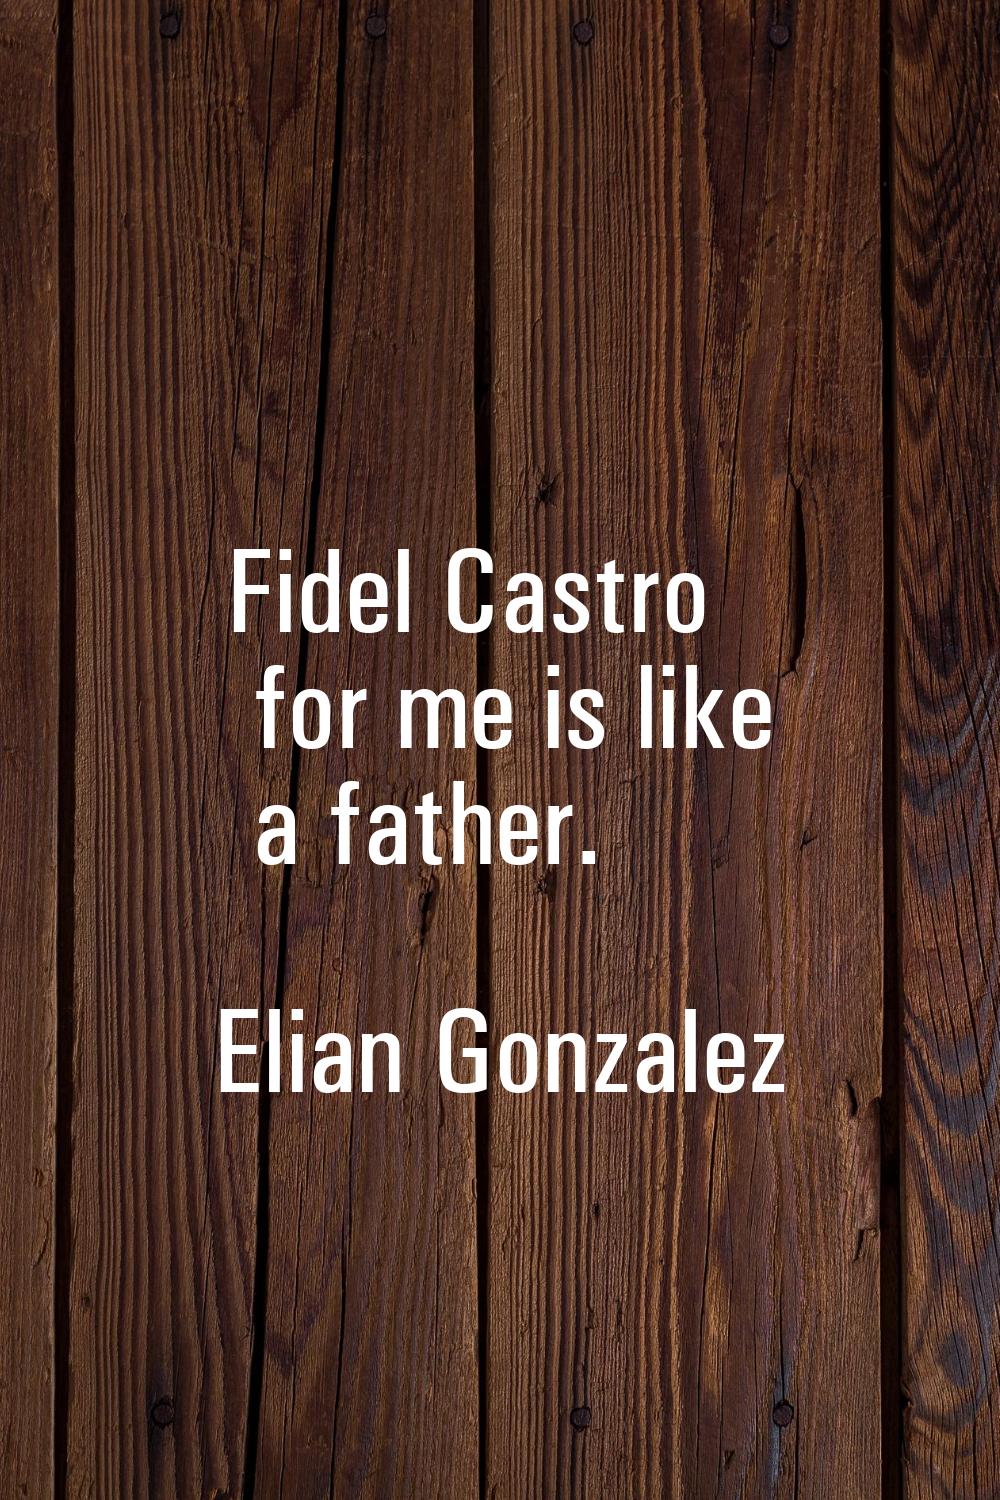 Fidel Castro for me is like a father.